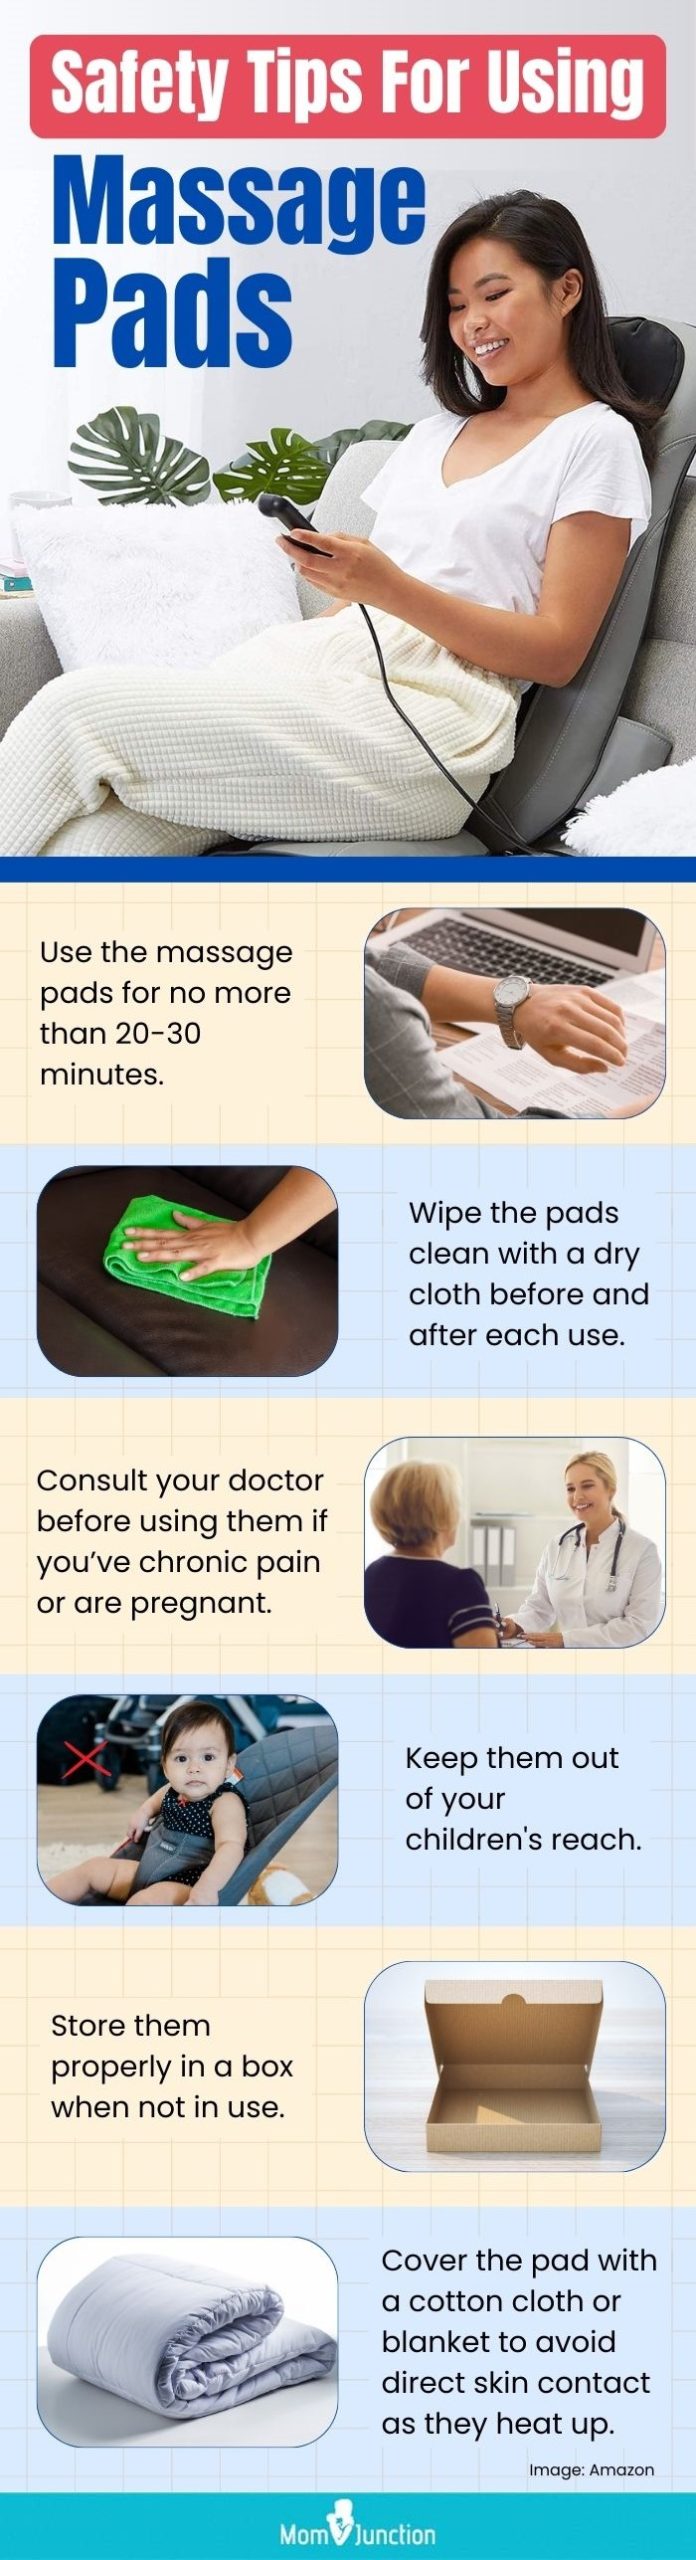 Safety Tips For Using Massage Pads (infographic)